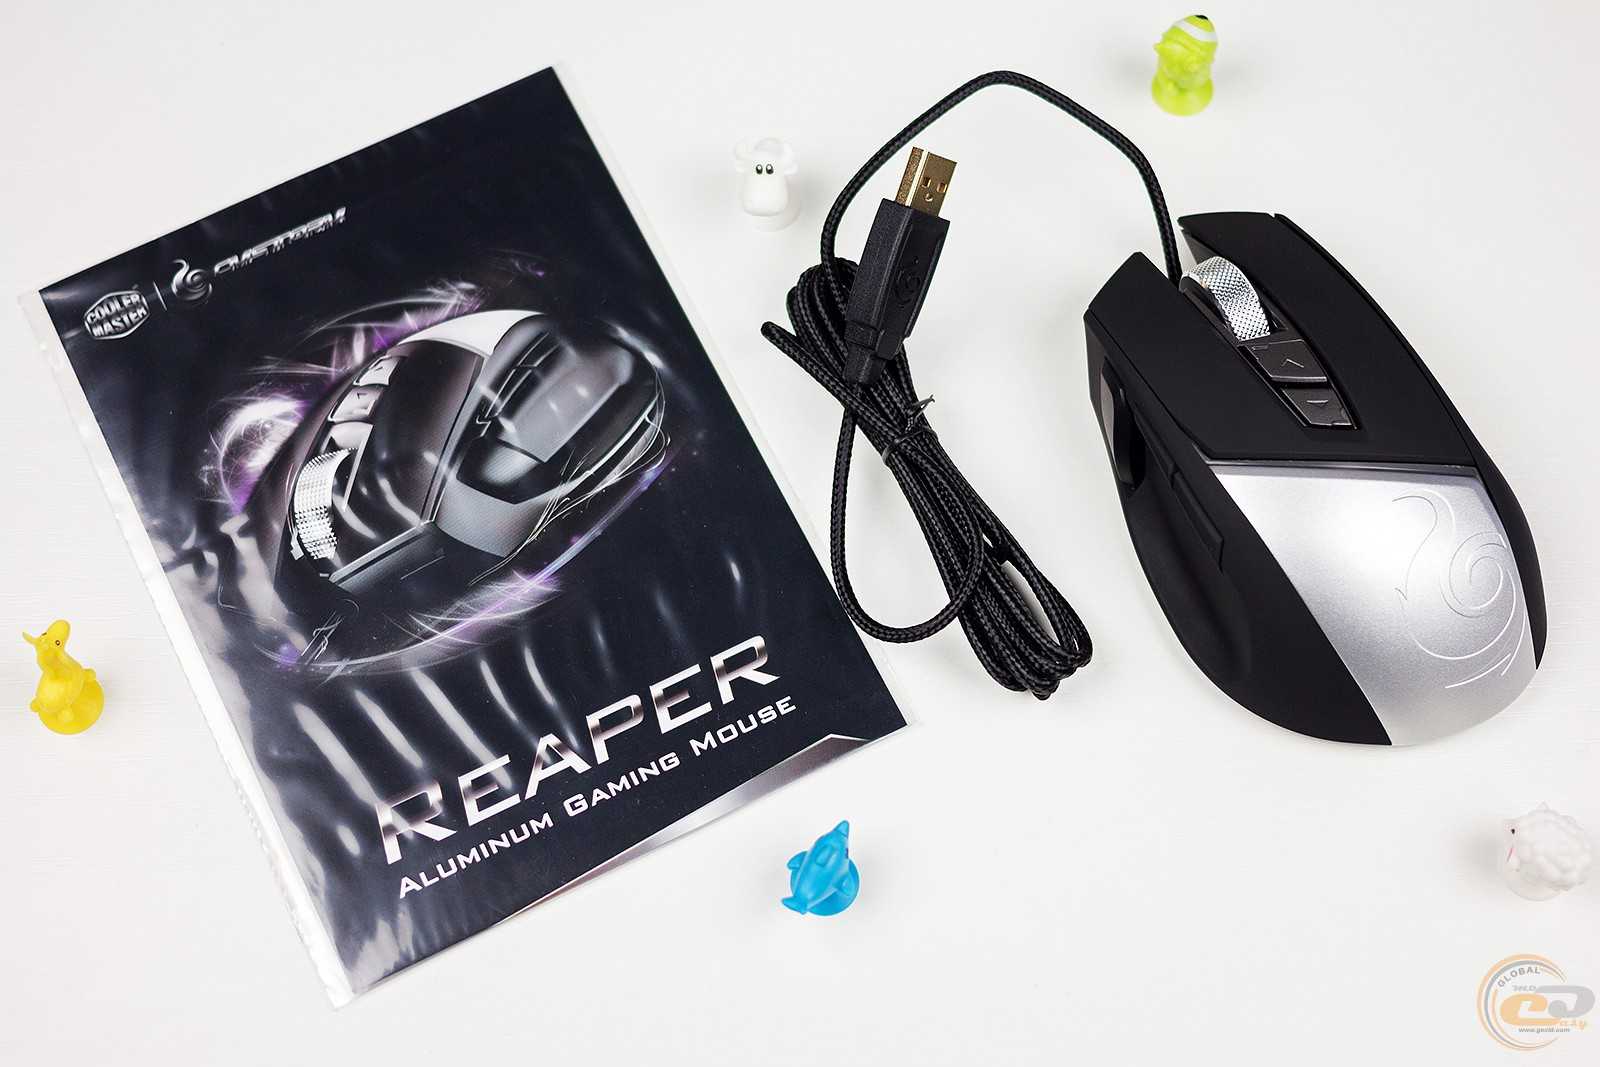 Cm storm reaper gaming mouse review